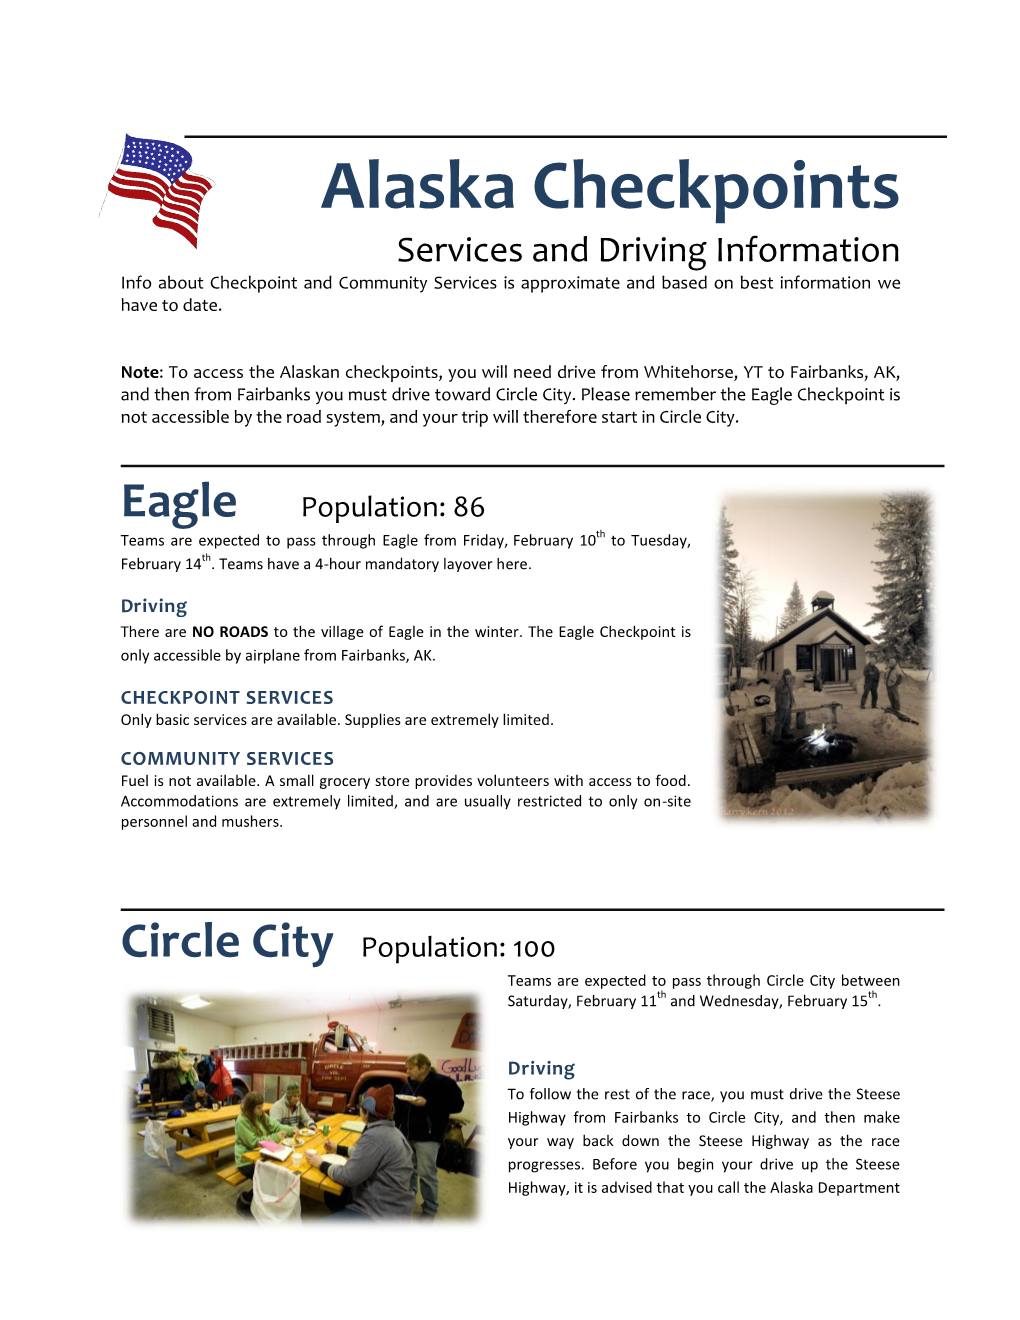 Alaska Checkpoints Services and Driving Information Info About Checkpoint and Community Services Is Approximate and Based on Best Information We Have to Date